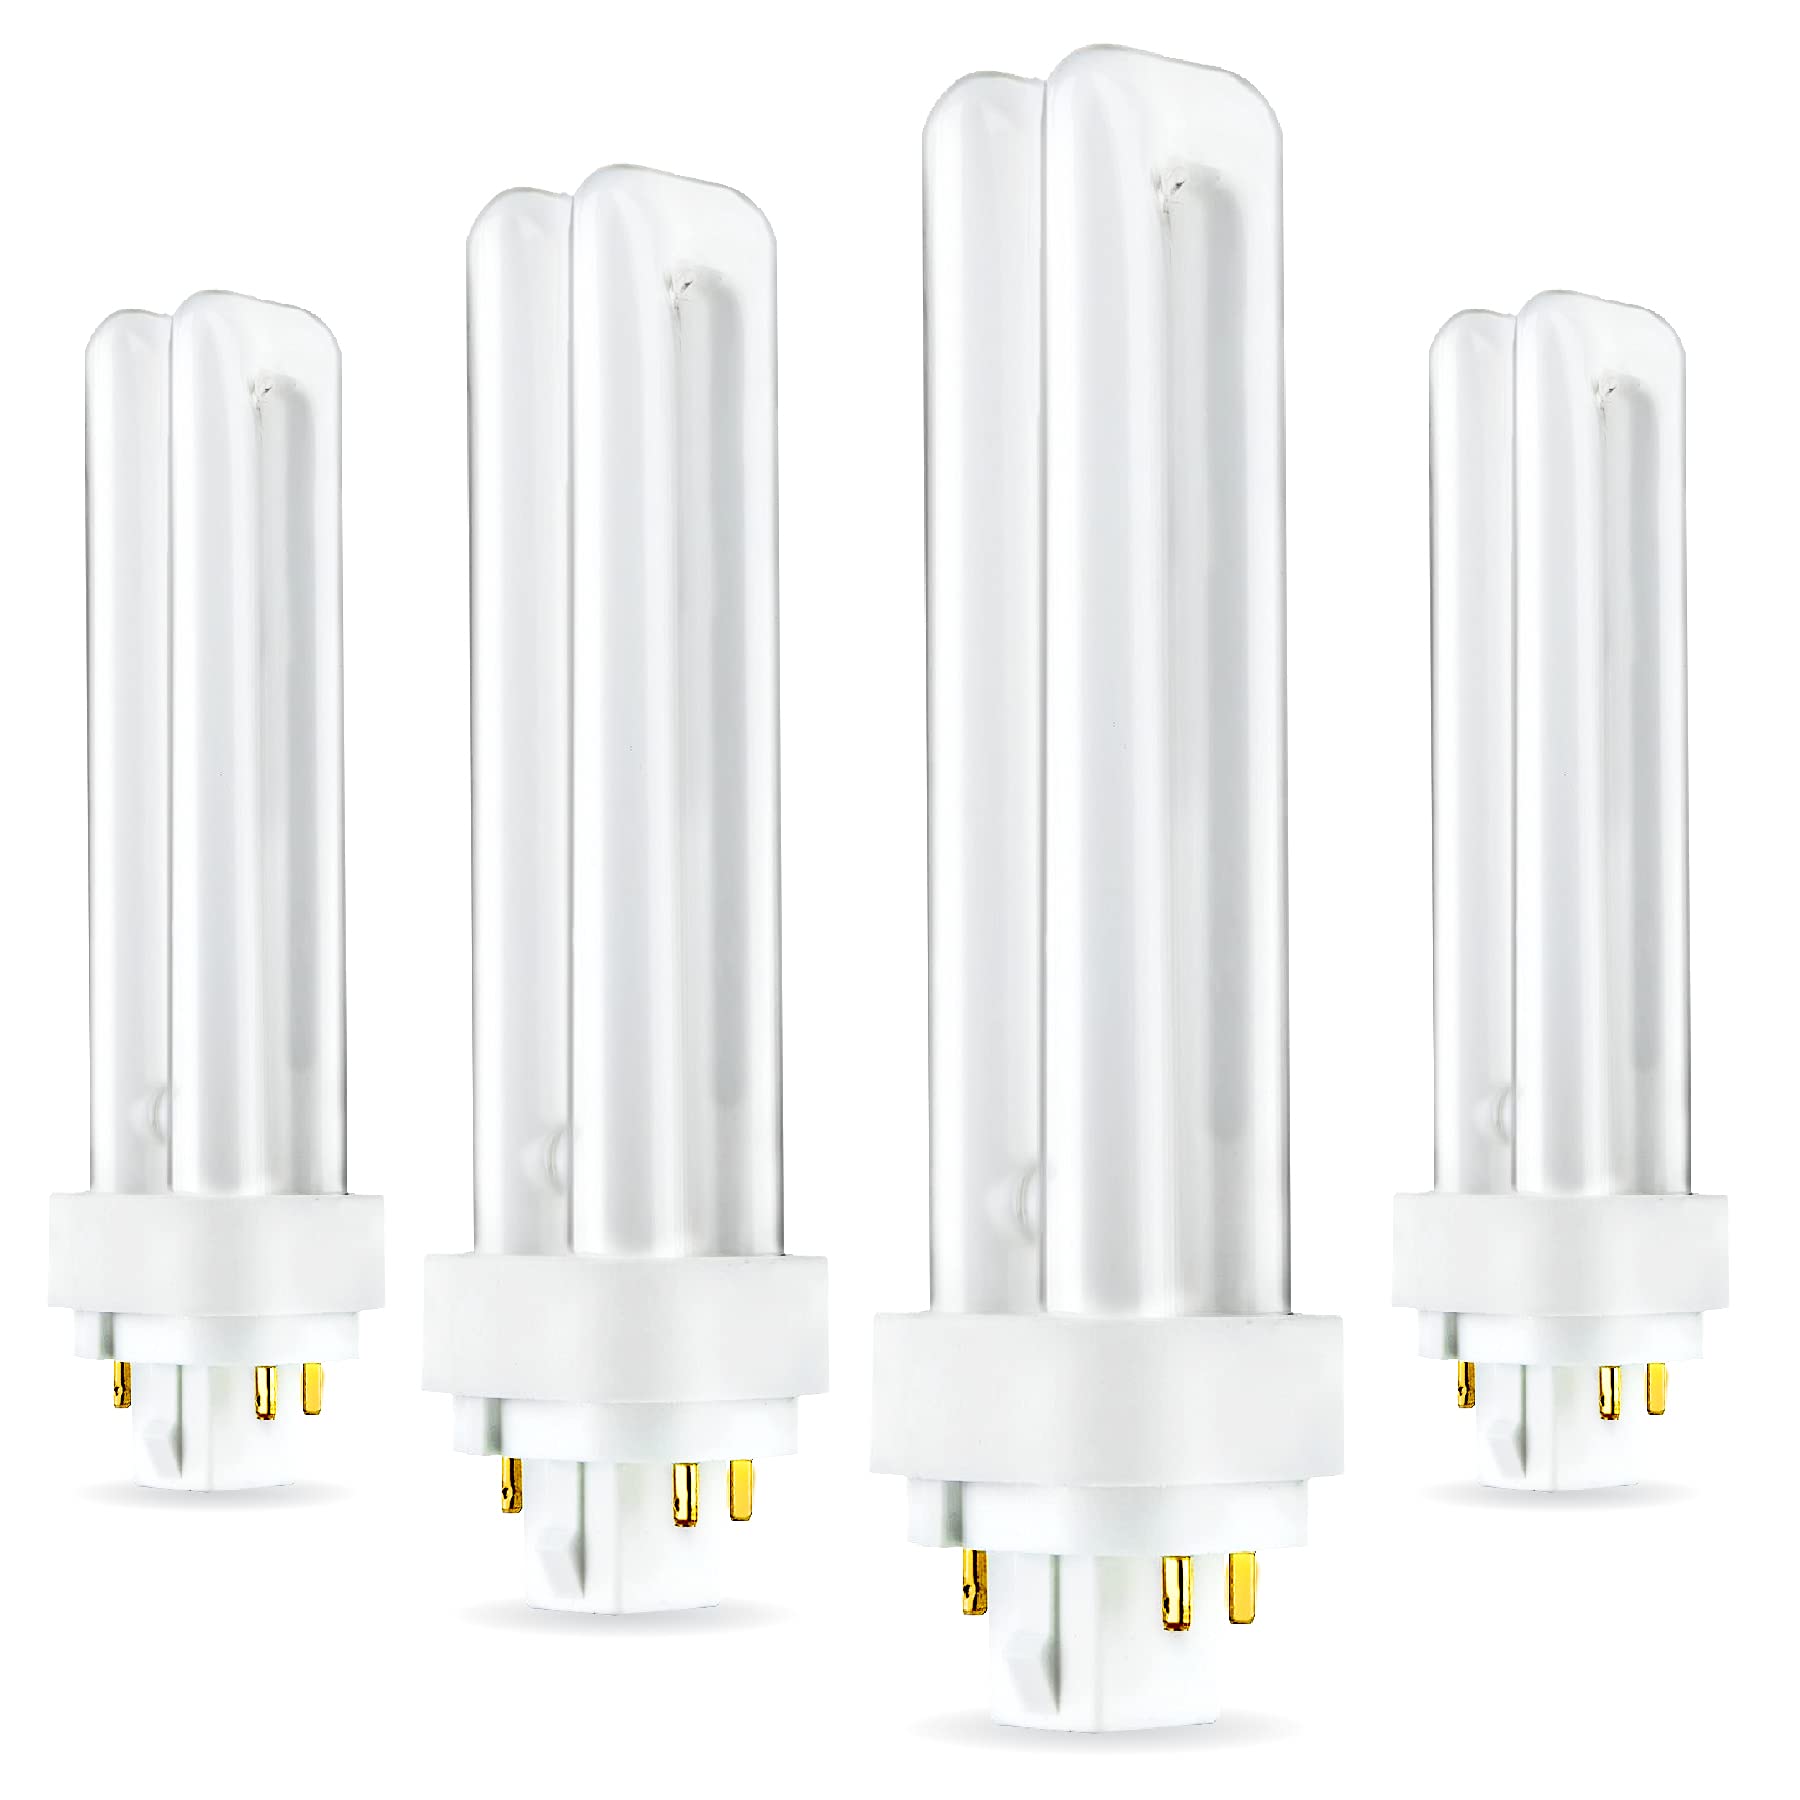 (4 Pack) PLC-13W 835, 4 Pin G24q-1, 13 Watt Double Tube, Compact Fluorescent Light Bulb, Replaces Philips 38327-3, GE 97596 and Sylvania 20671  - Good